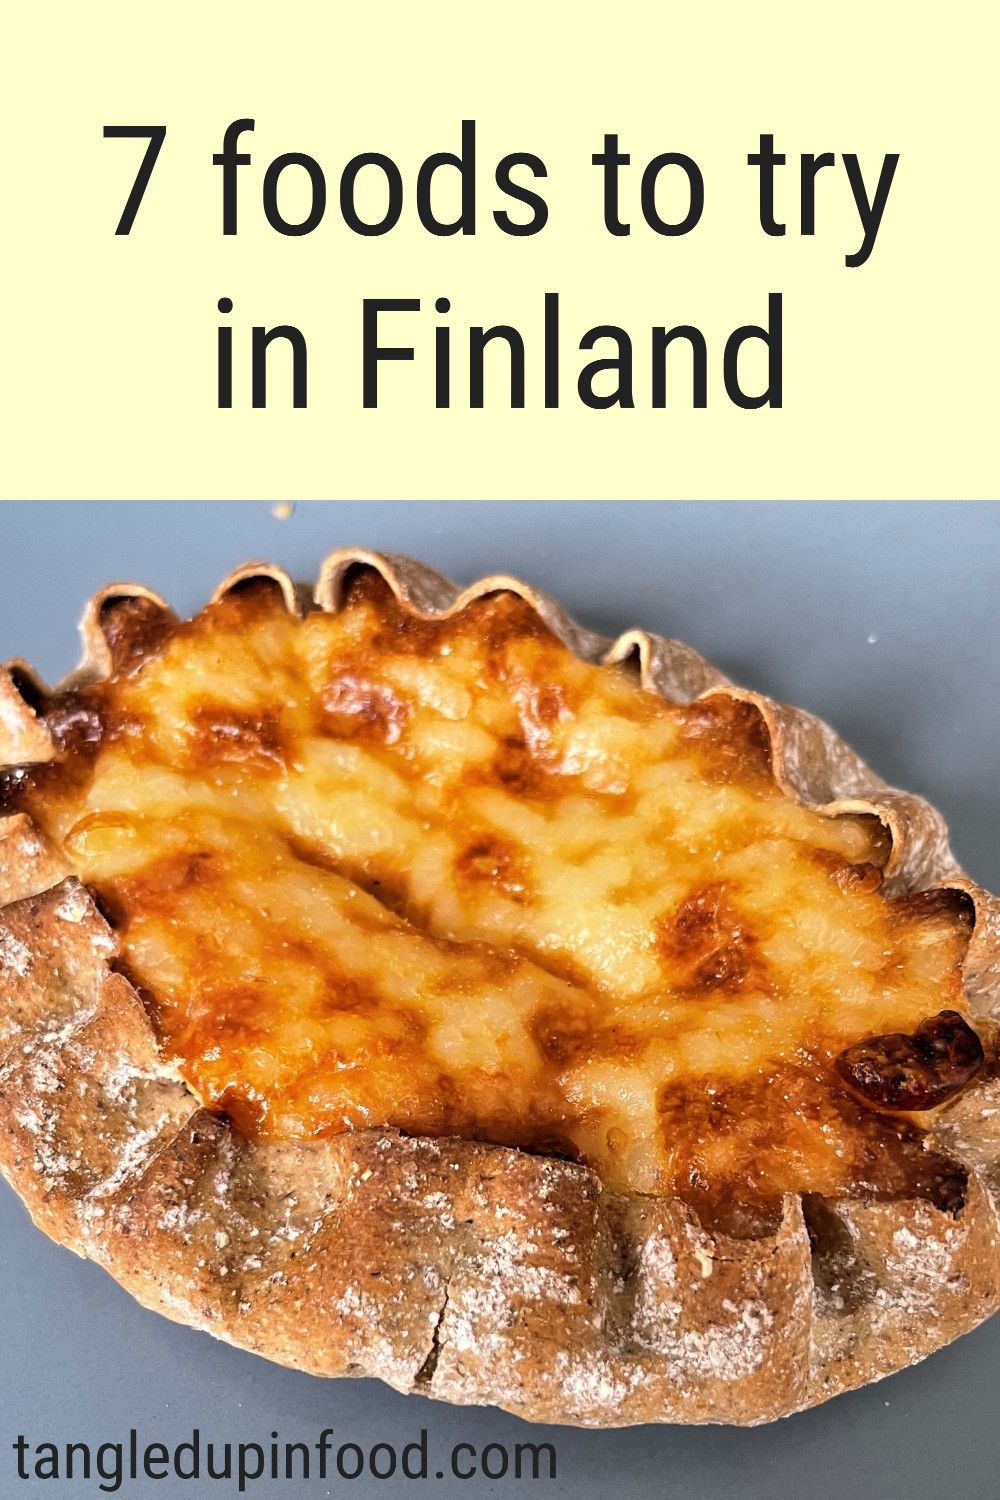 Picture of Karelian pasty with text reading "7 foods to try in Finland"